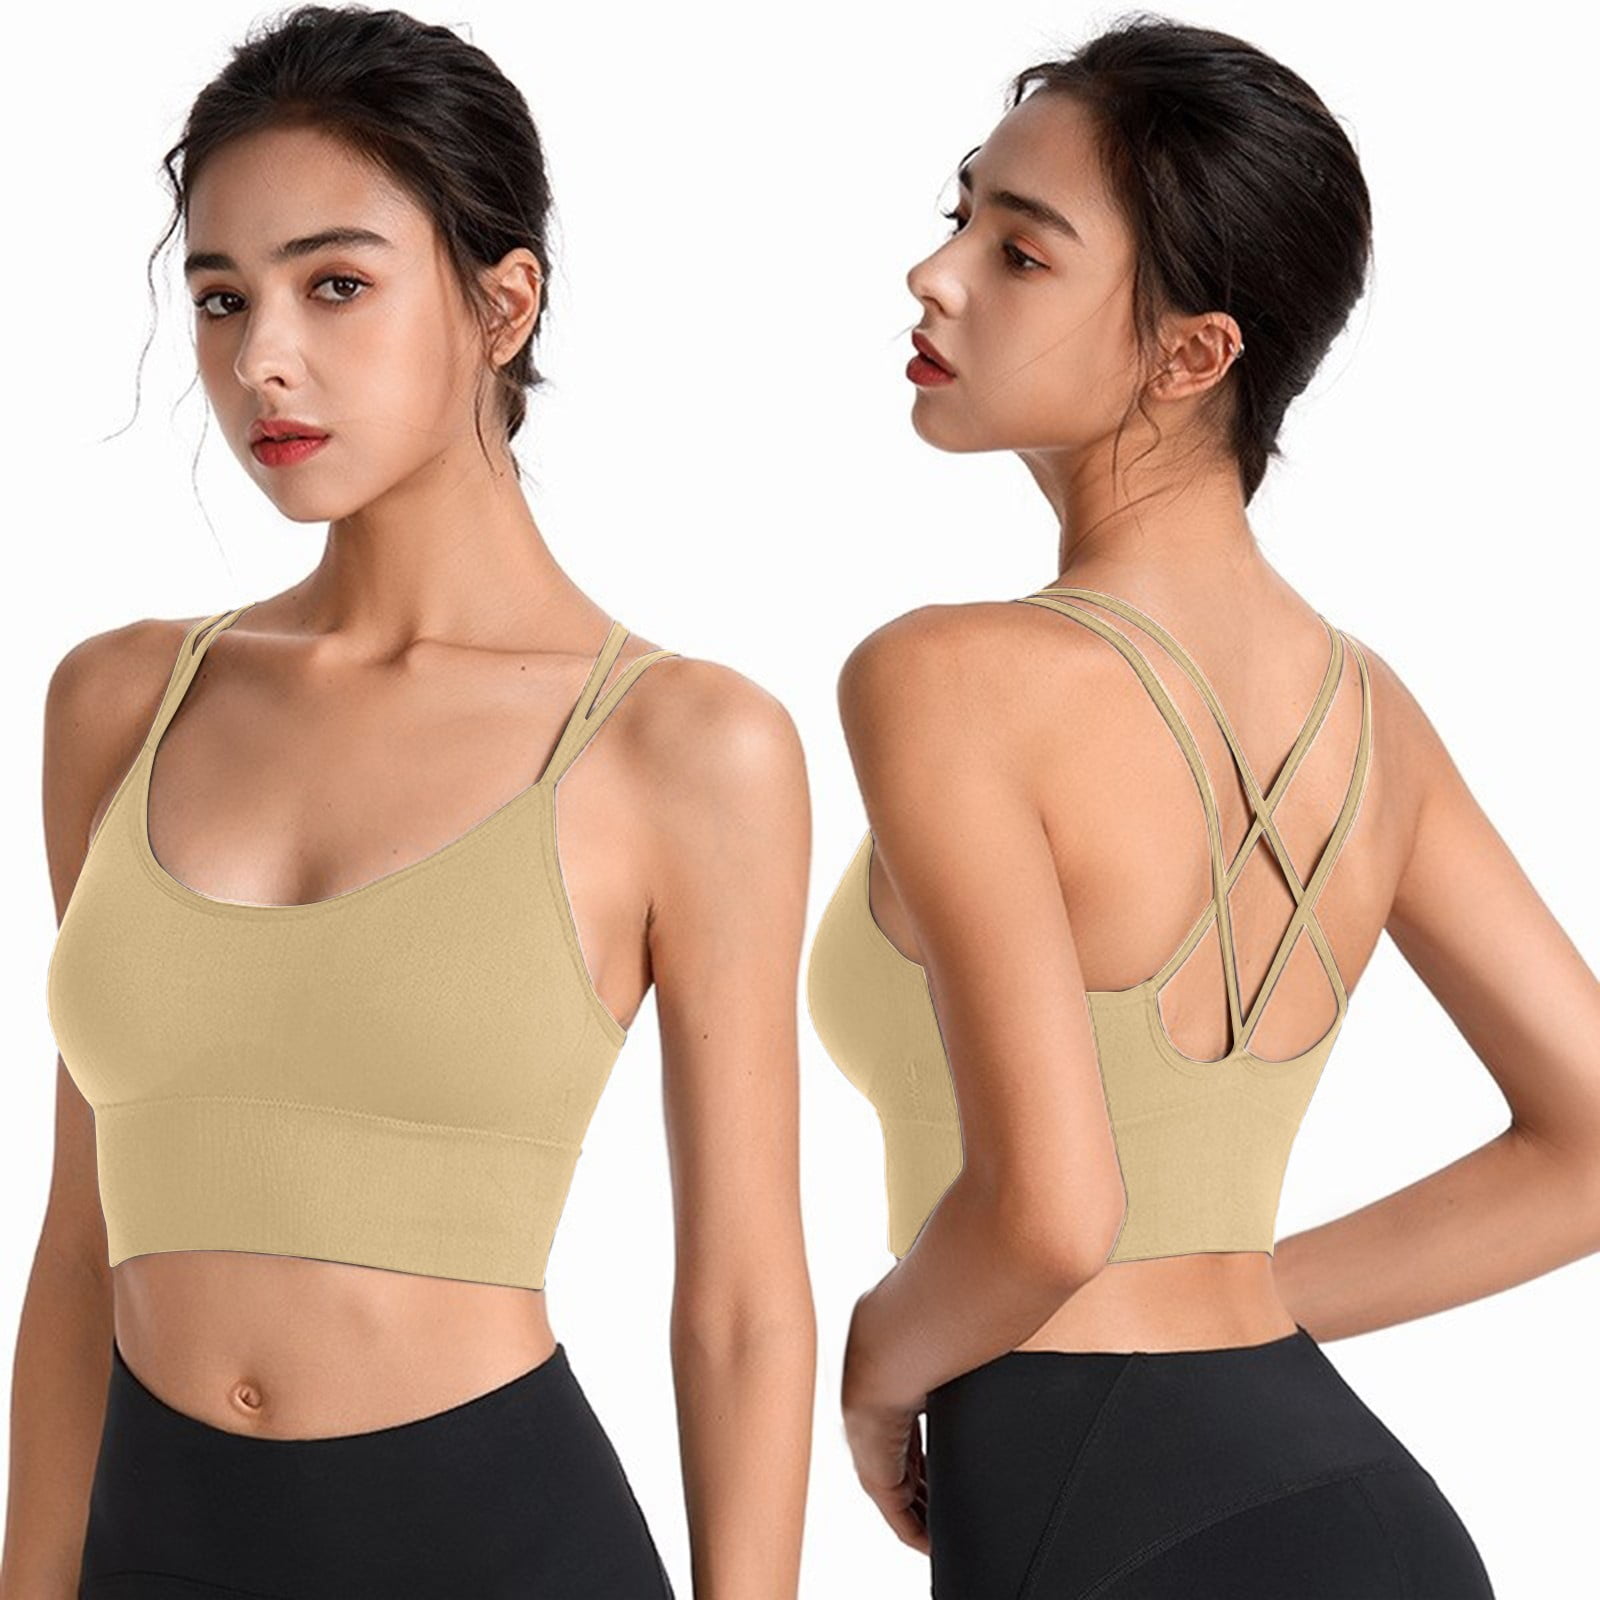 CAICJ98 Sports Bras for Women Sports Bras for Women High Impact Racerback  Workout Sports Bra High Support for L Bust Plus Size Beige,XXL 